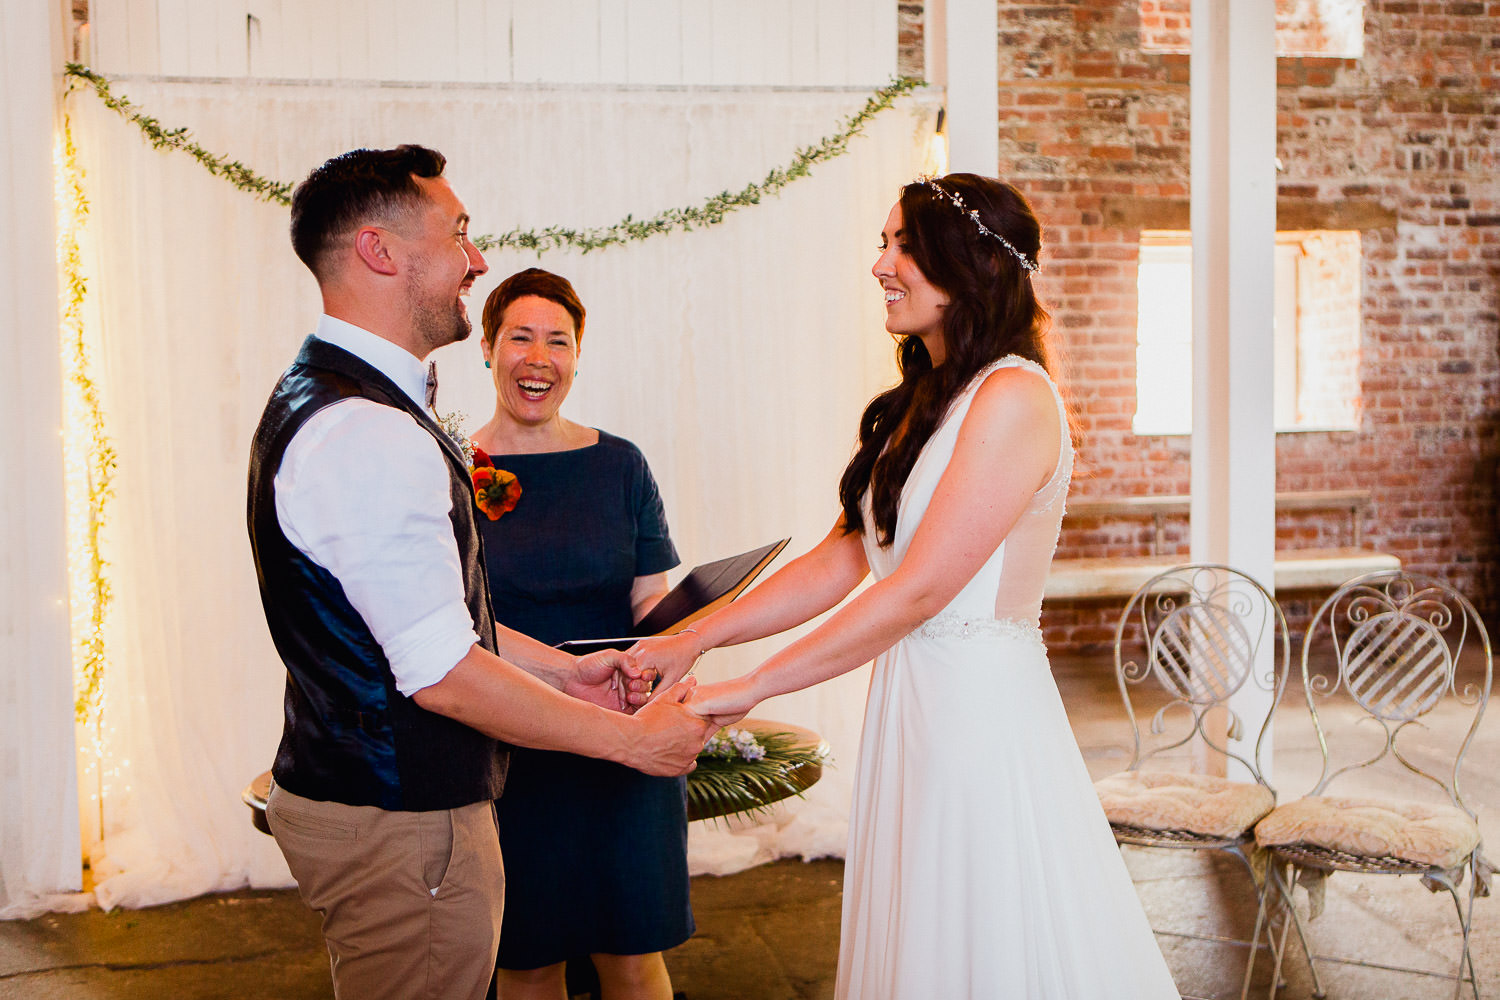 bride and groom exchanging vows during wedding ceremony